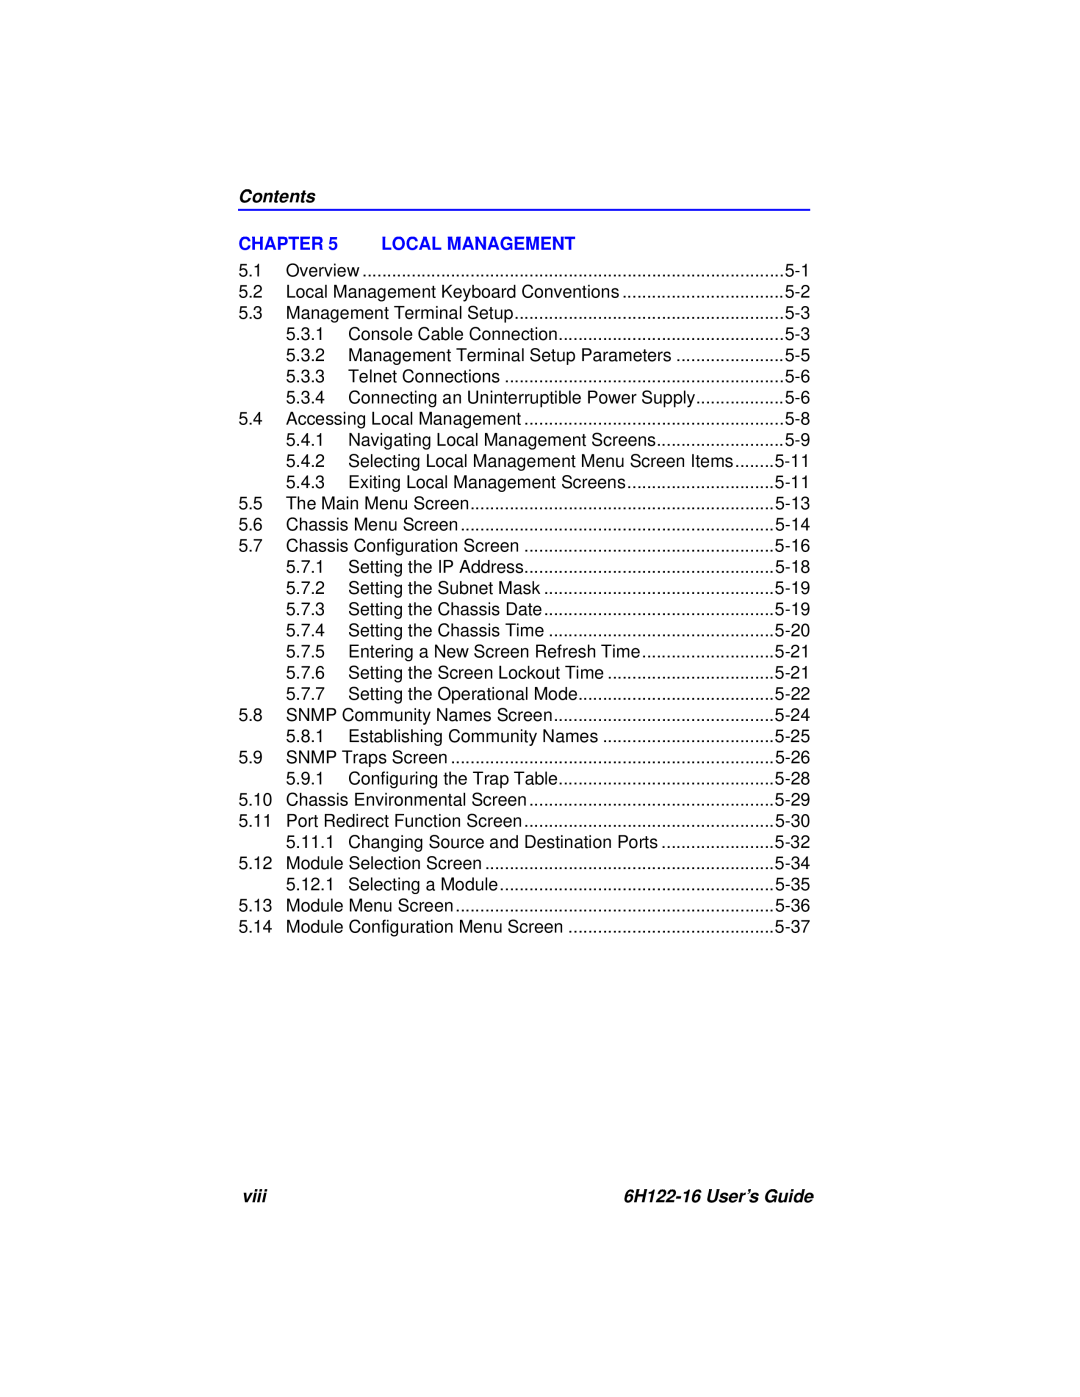 Cabletron Systems manual Contents, Chapter, Local Management, viii, 6H122-16 User’s Guide 